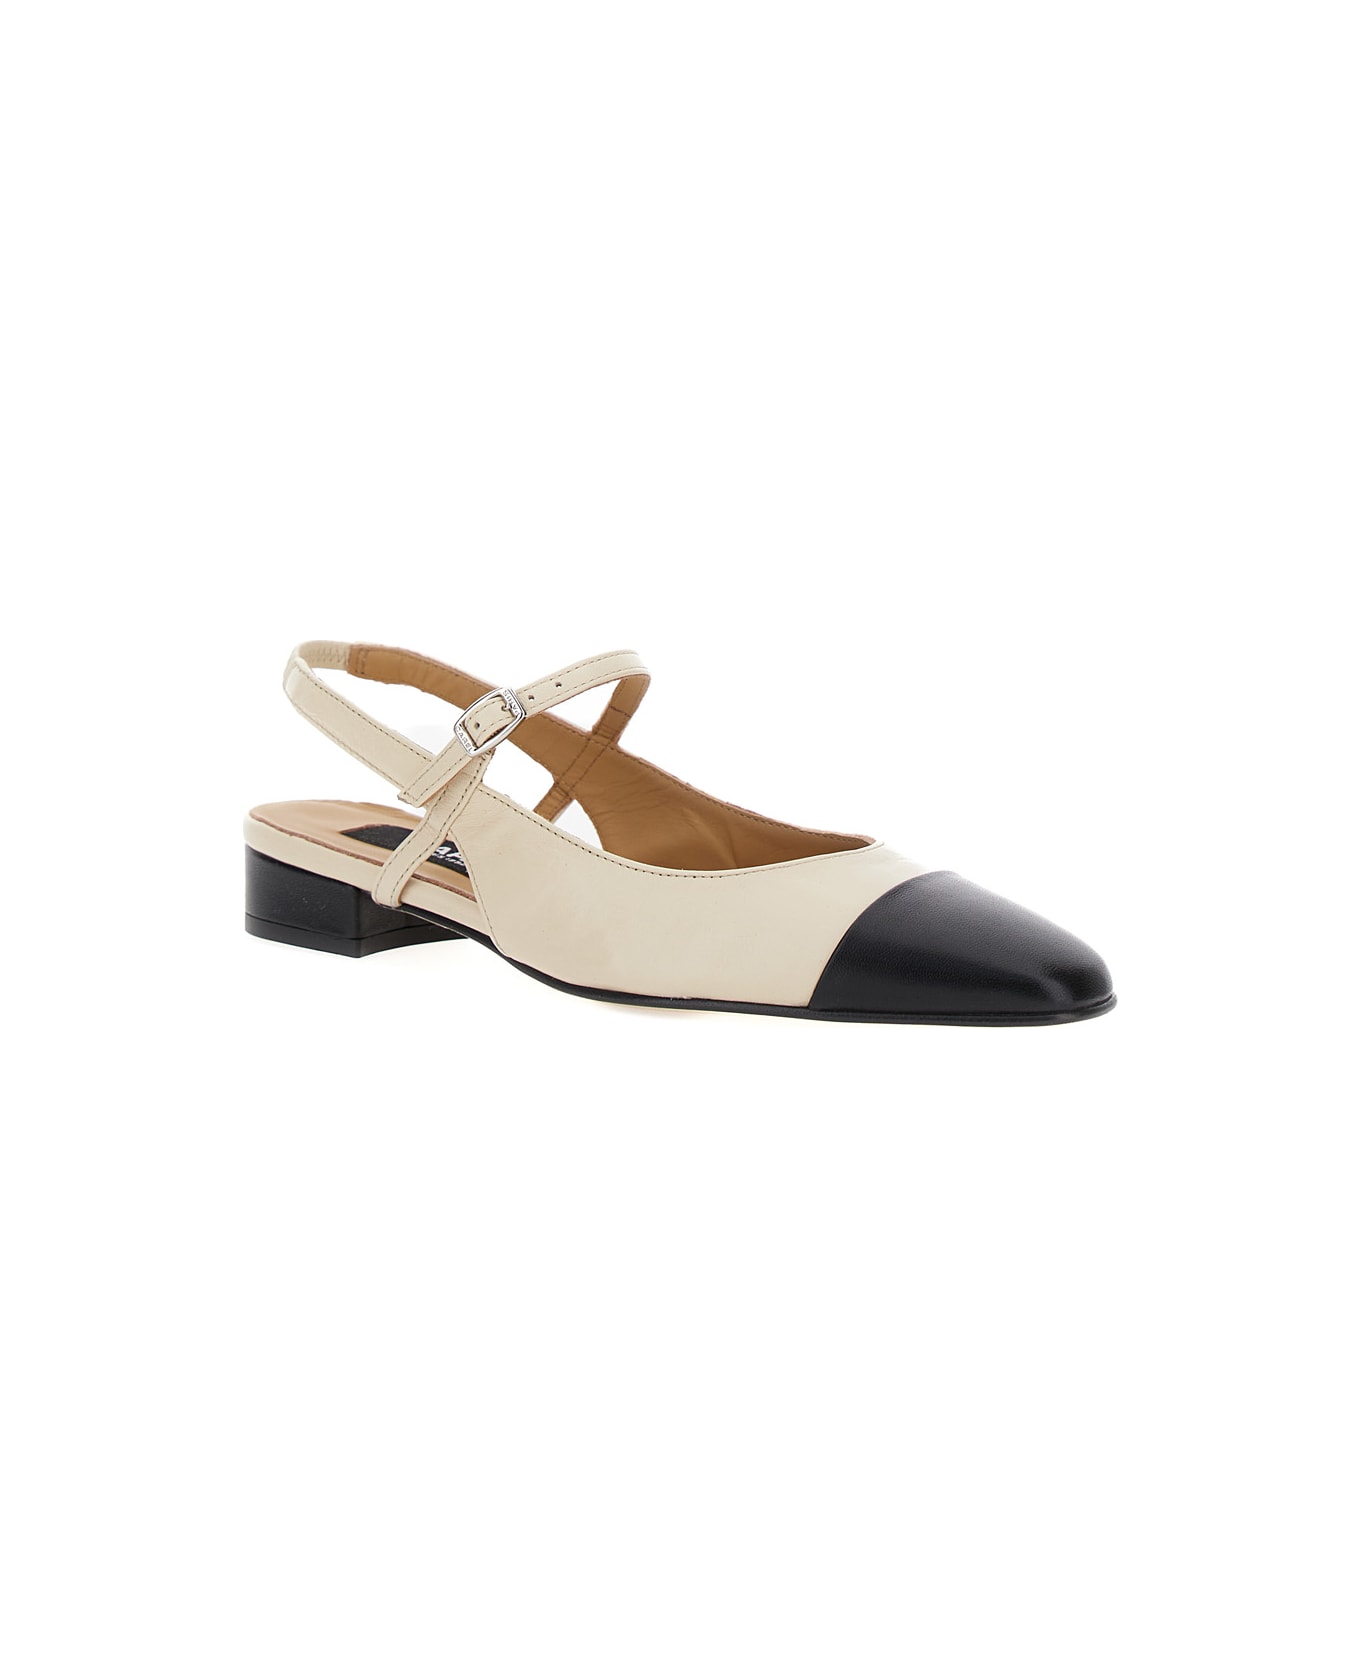 Carel White Slingback Pumps With Contrasting Toe In Leather Woman - Beige フラットシューズ